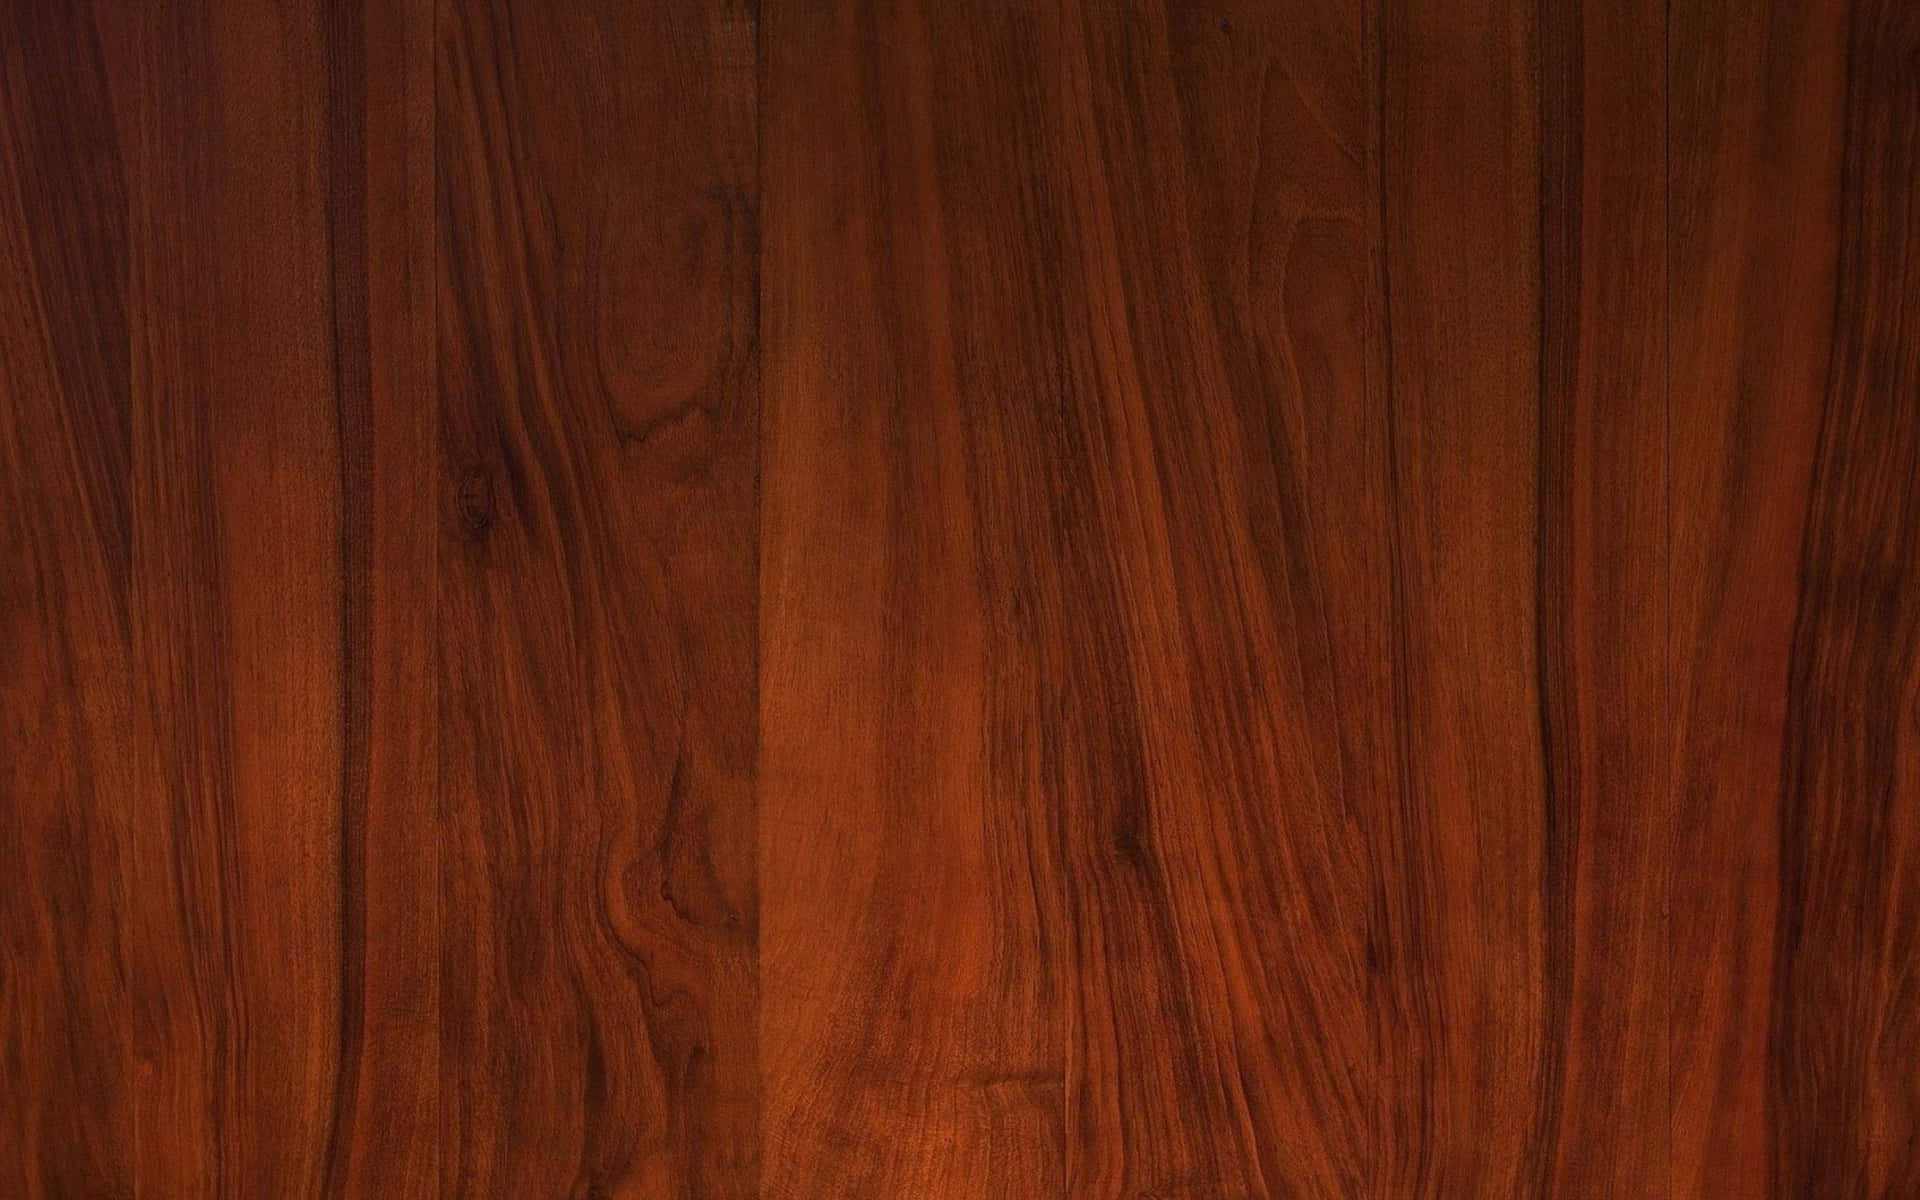 Attractive Natural Wood Grain Background